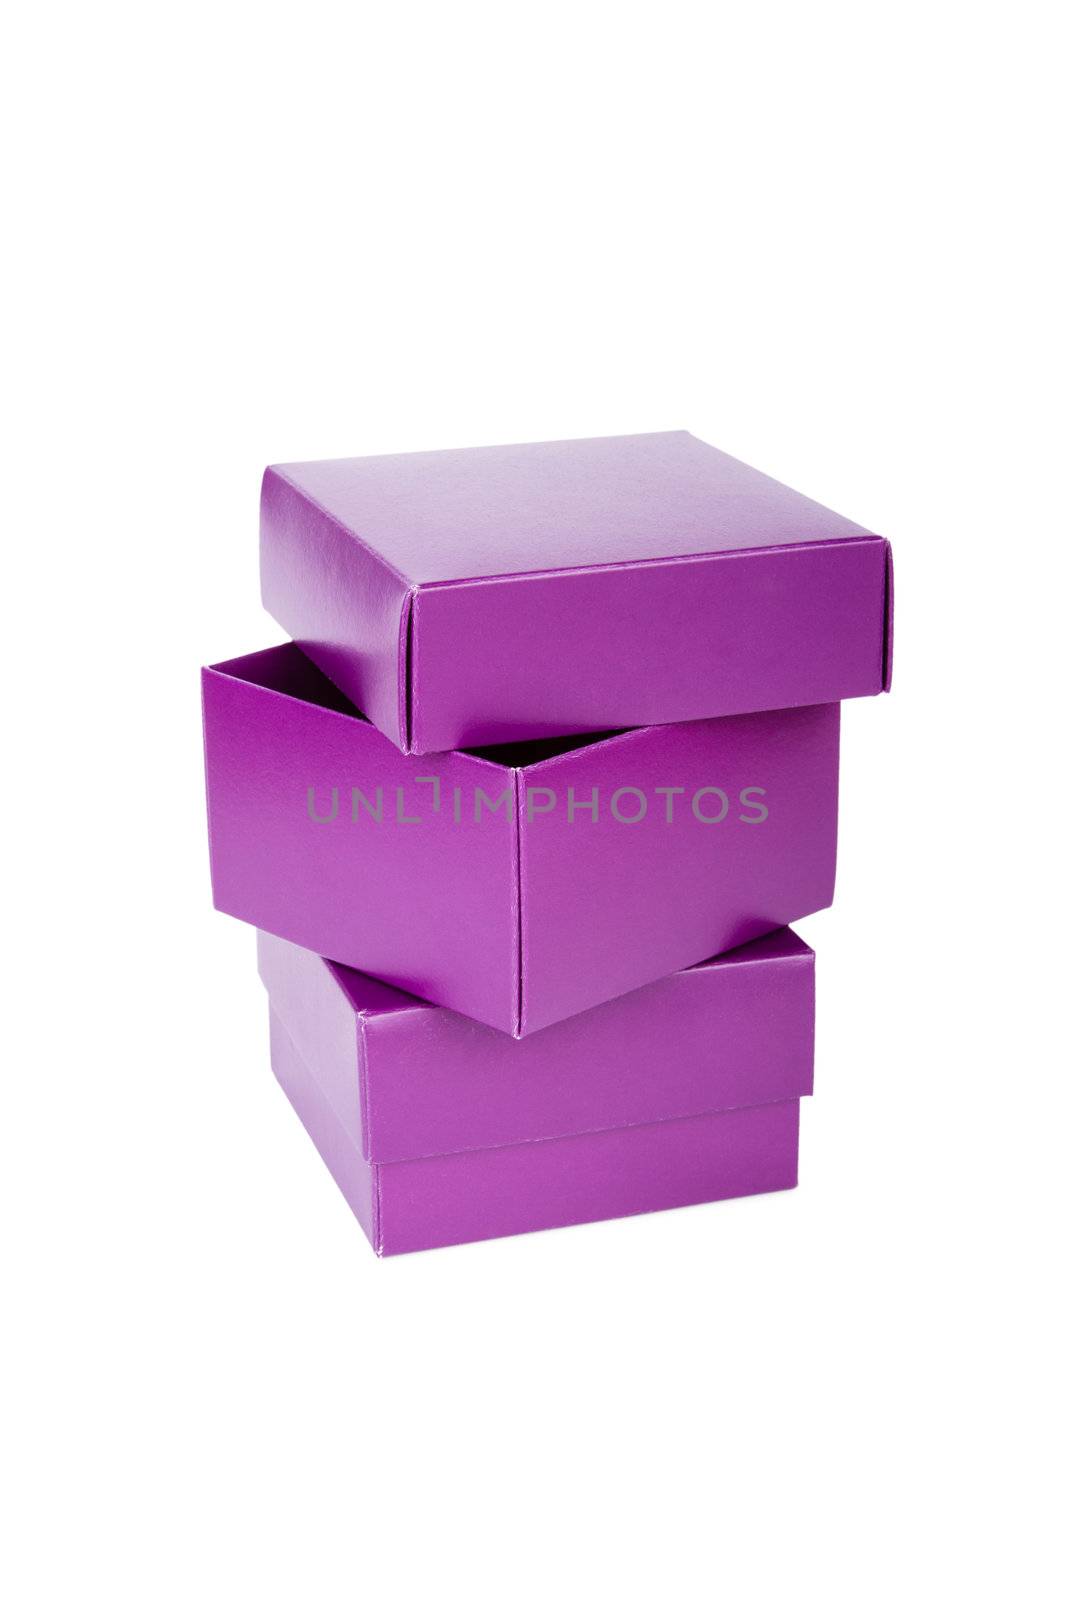 Open empty purple boxes, isolated on white background